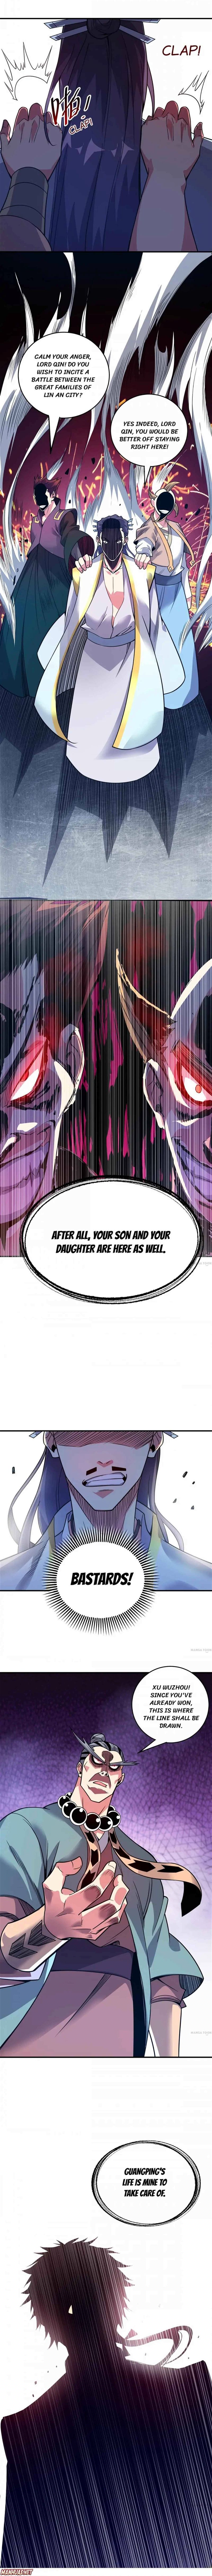 The First Son-In-Law Vanguard of All Time Chapter 57 page 3